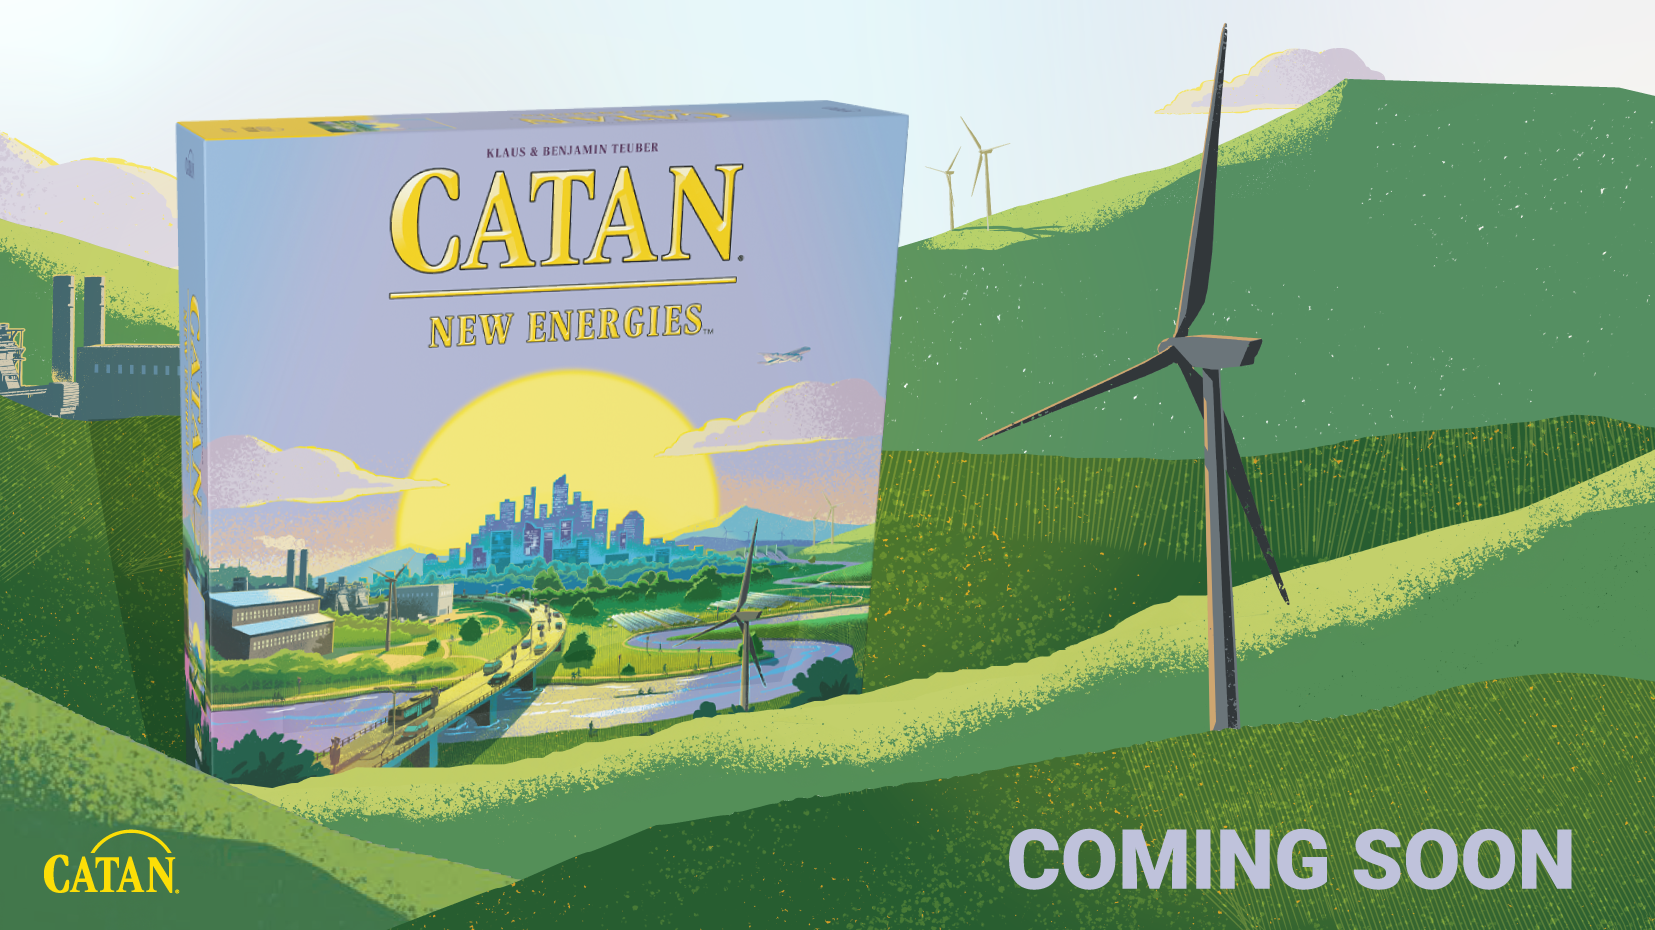 Catan: New Energies is a modern re-make of the classic board game